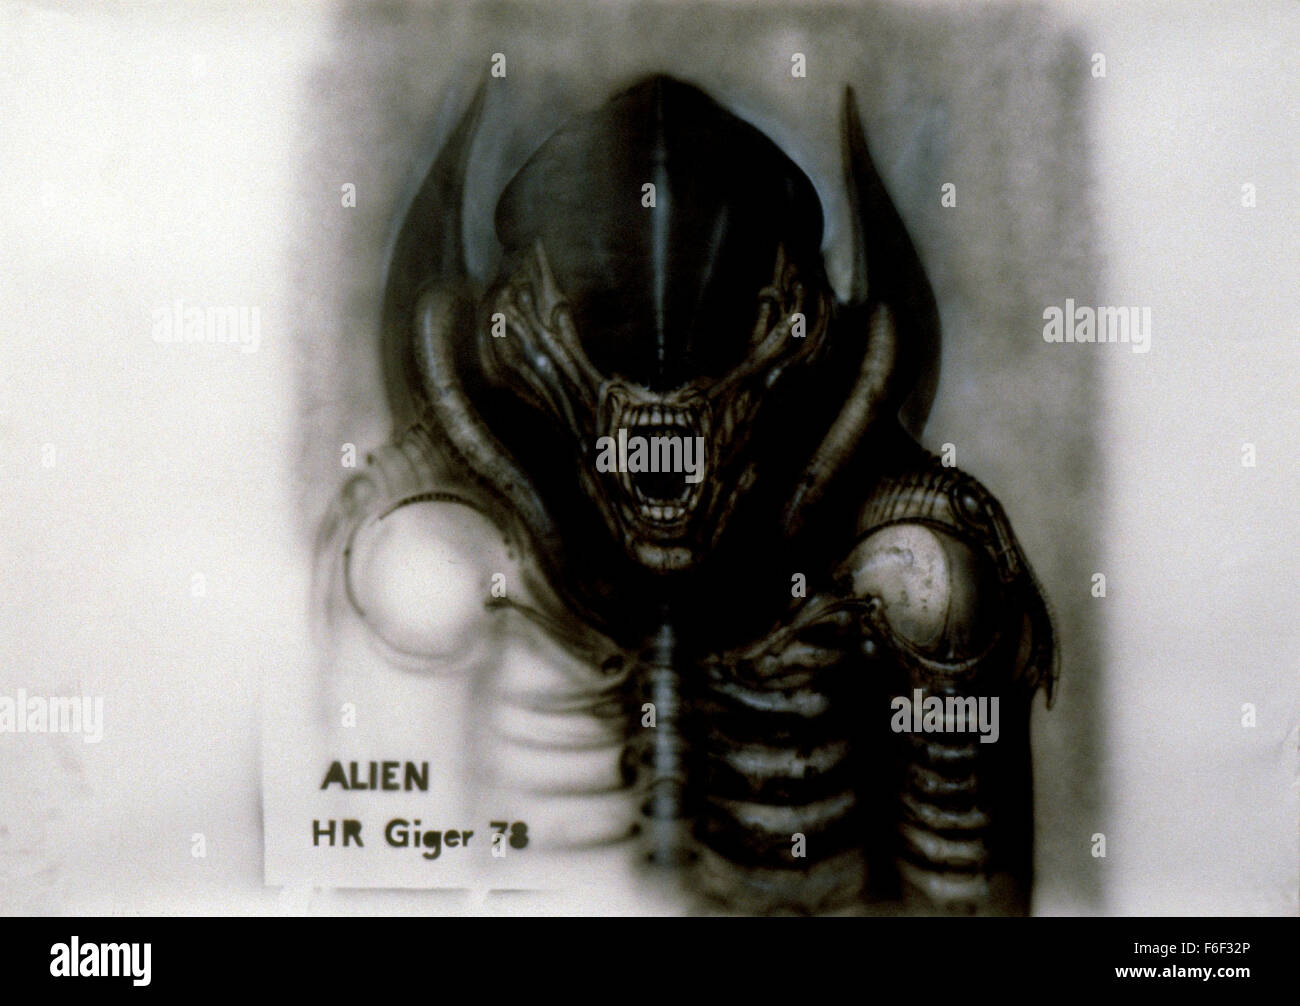 Aug 06, 1979; London, UK; Original artwork done by H.R. Giger for the sci-fi thriller 'Alien: The Directors Cut' directed by Ridley Scott. Stock Photo